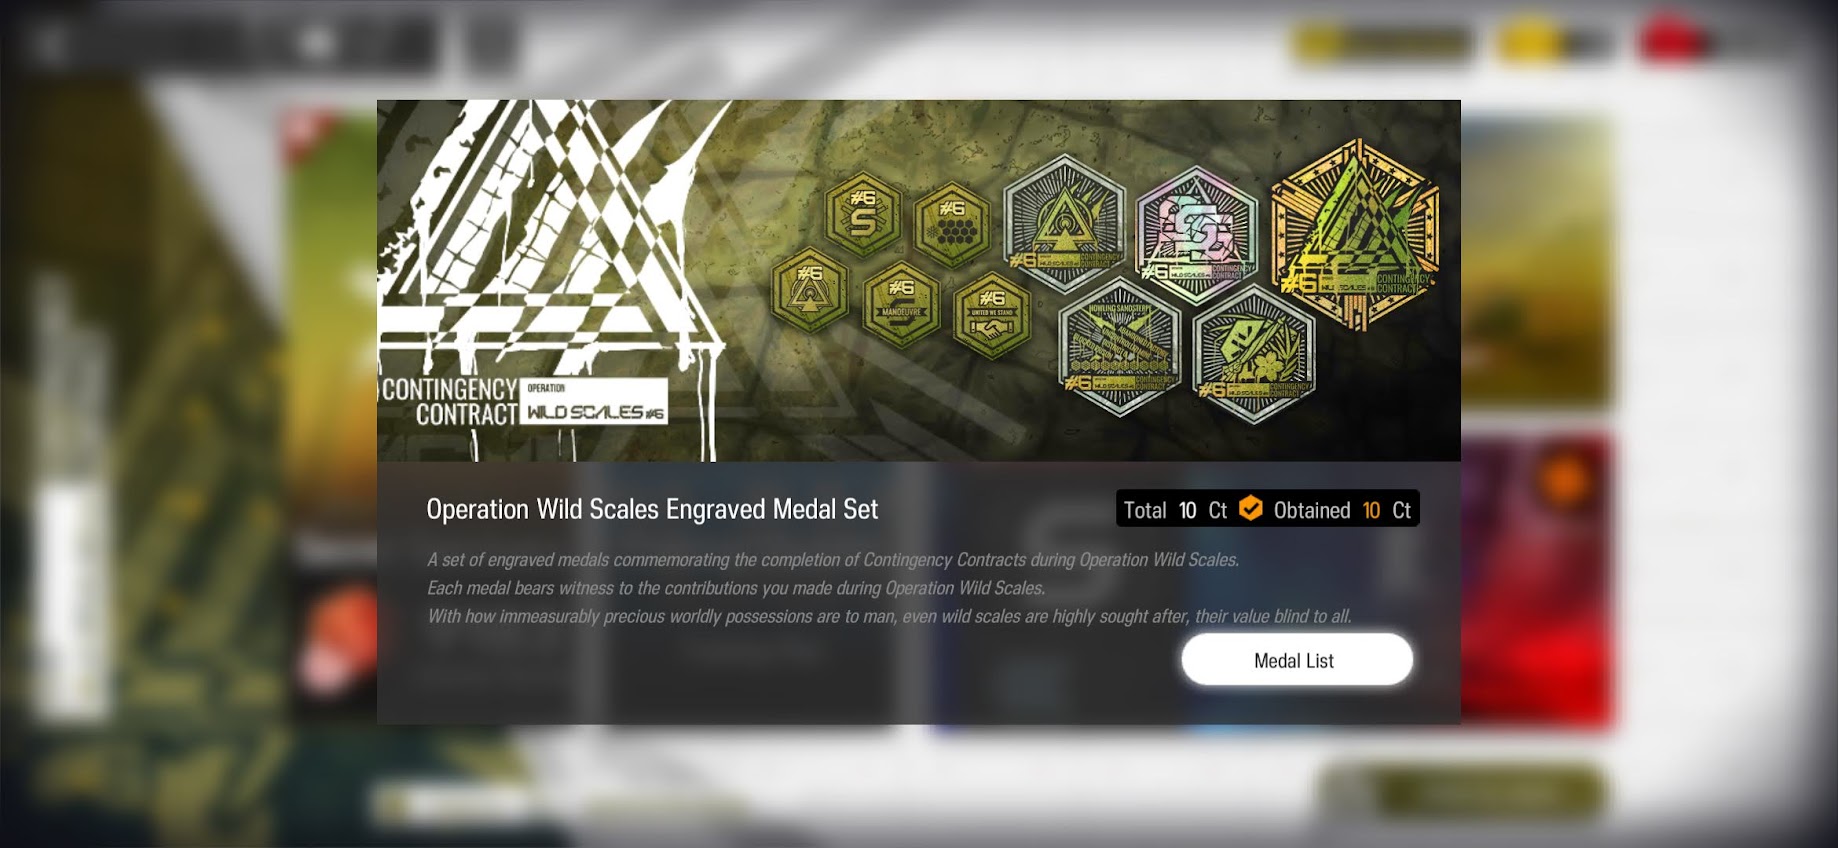 Operation Wild Scales Engraved Medal Set